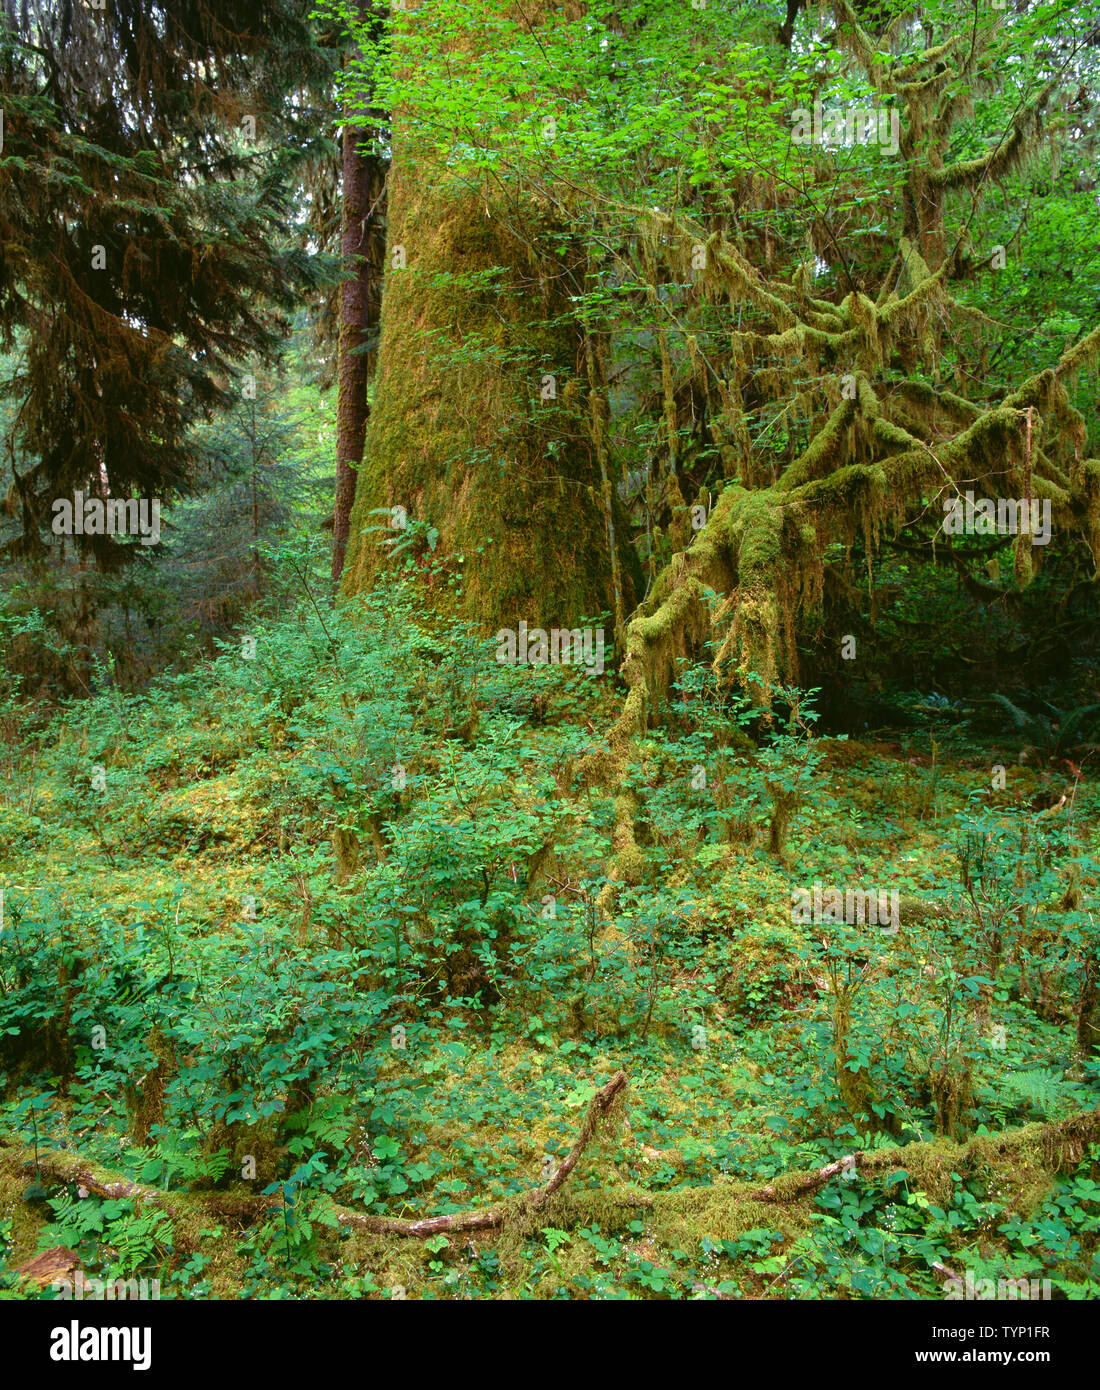 USA, Washington, Olympic National Park, Sitka spruce and moss covered, lush vegetation in the Hoh Rain Forest. Stock Photo